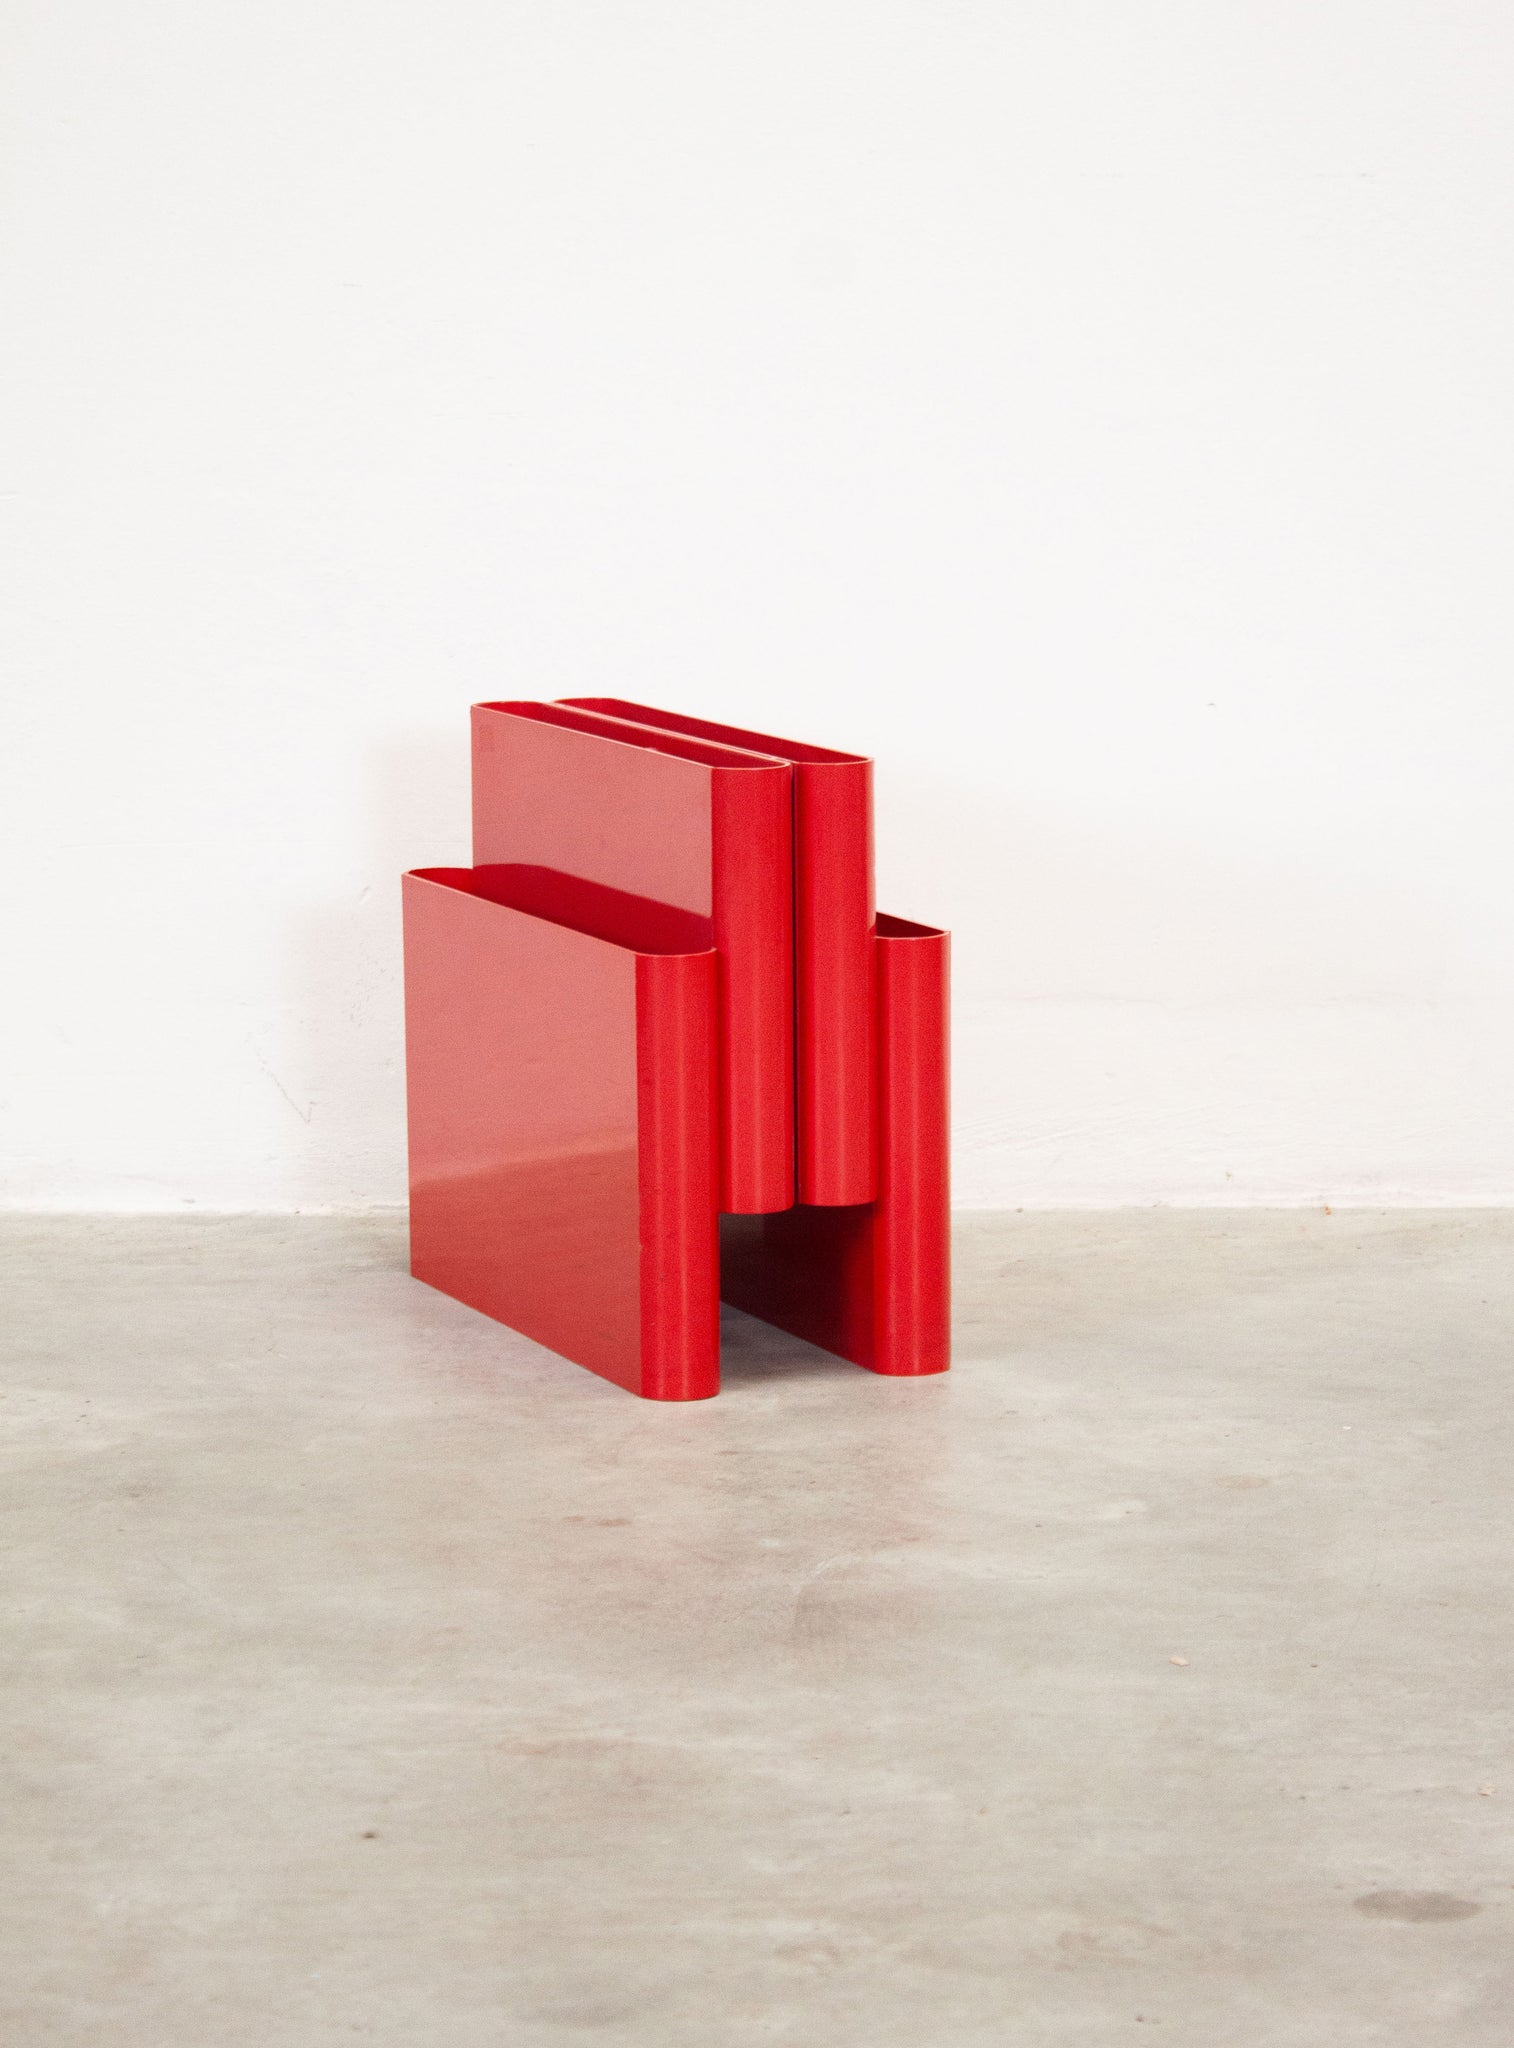 Kartell Magazine Rack by Giotto Stoppino (Red)